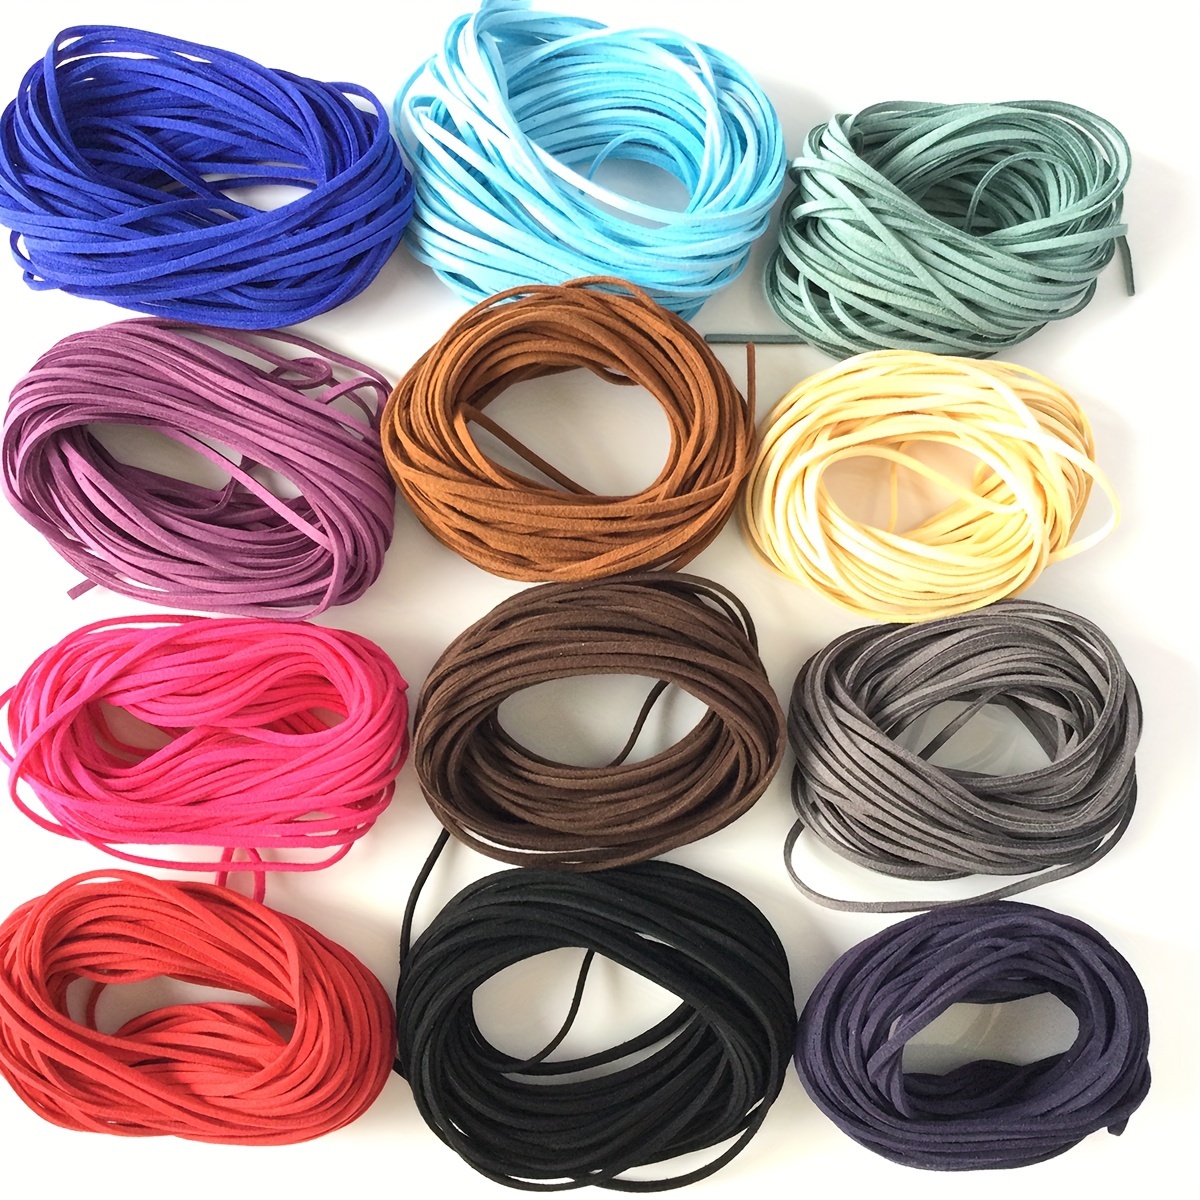 DIY Crafts Pack of 10 Sets, Silver, Faux Leather Cord Suede Cord String  Rope Thread, for Jewelry Making Beading Necklace Bracelet Crafts with AS